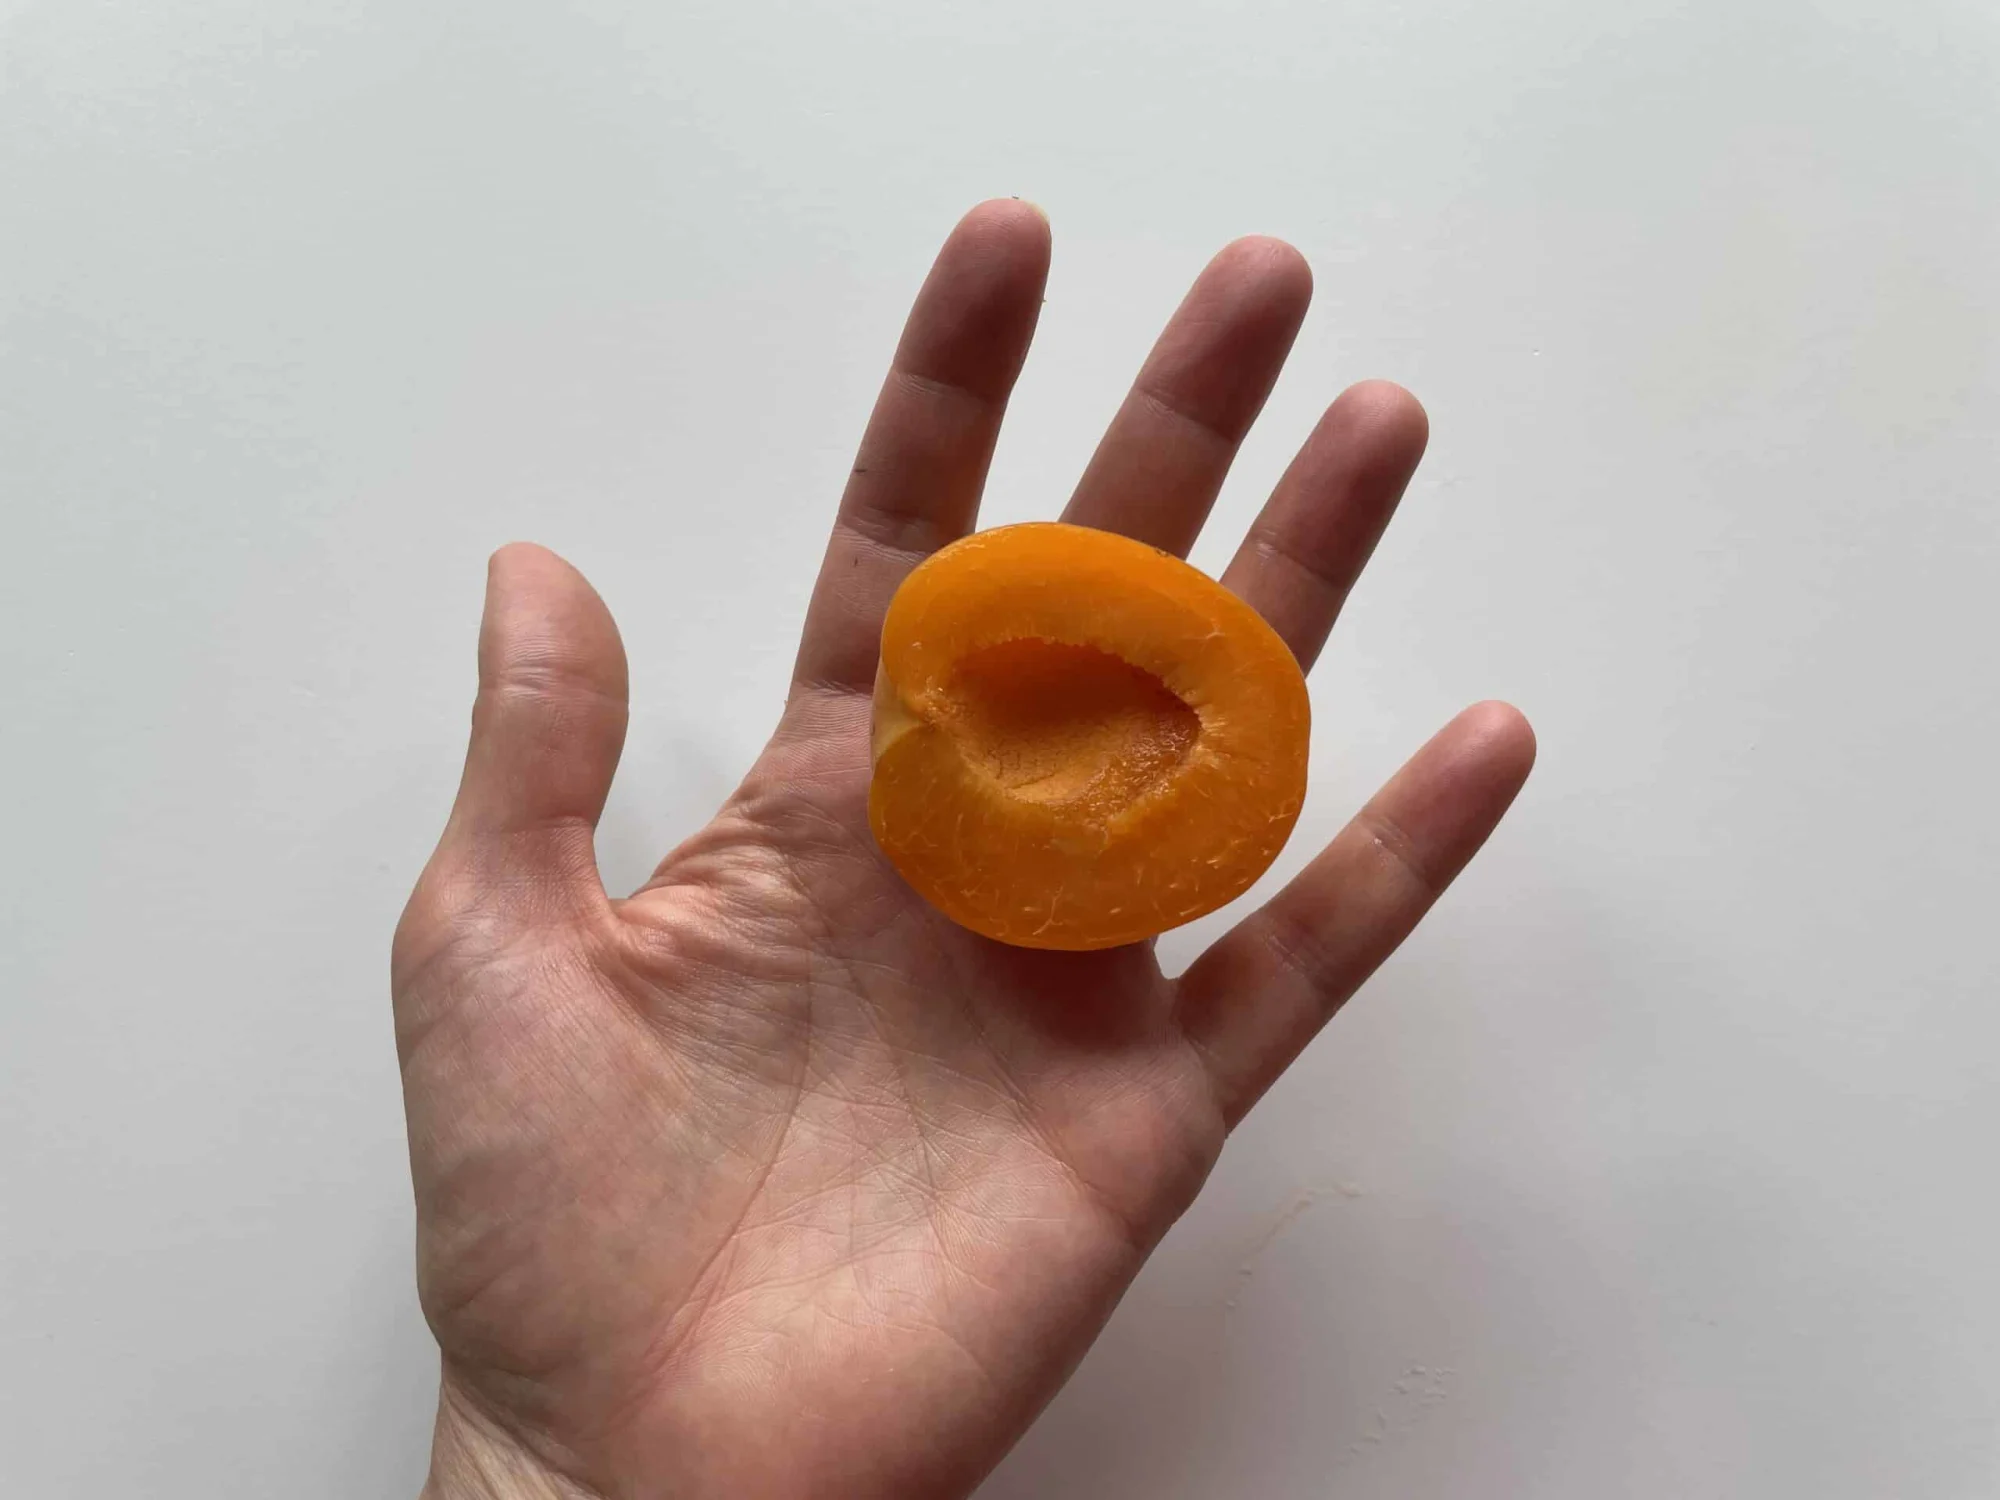 a hand holding a ripe half of an apricot